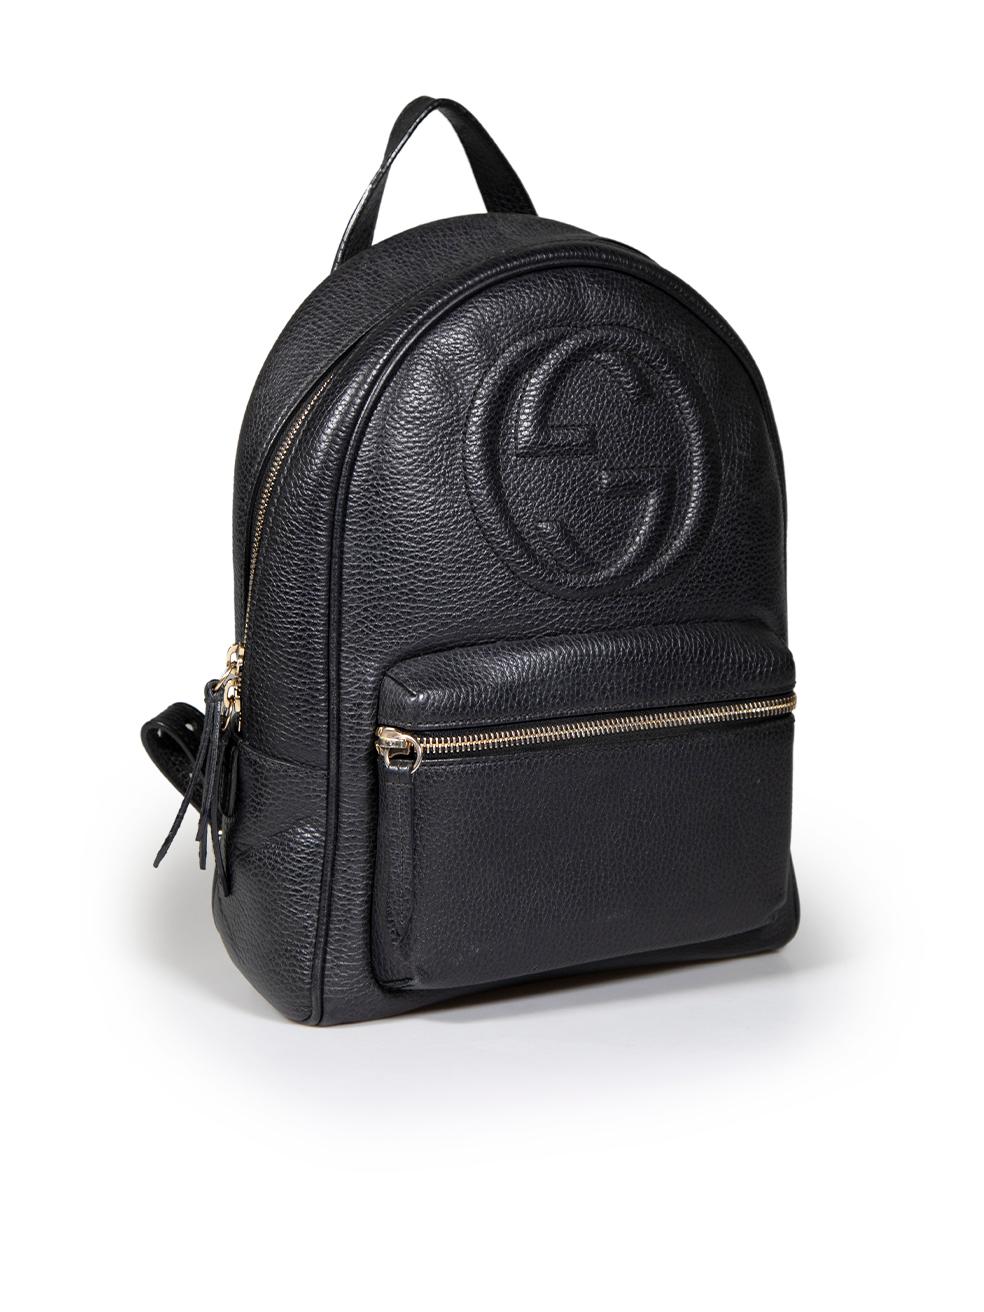 CONDITION is Very good. Minimal wear to backpack is evident. There are moderate marks and abrasions to the main compartment lining and abrasions to the base and pocket corners on this used Gucci designer resale item. Comes with original dust bag.
 
